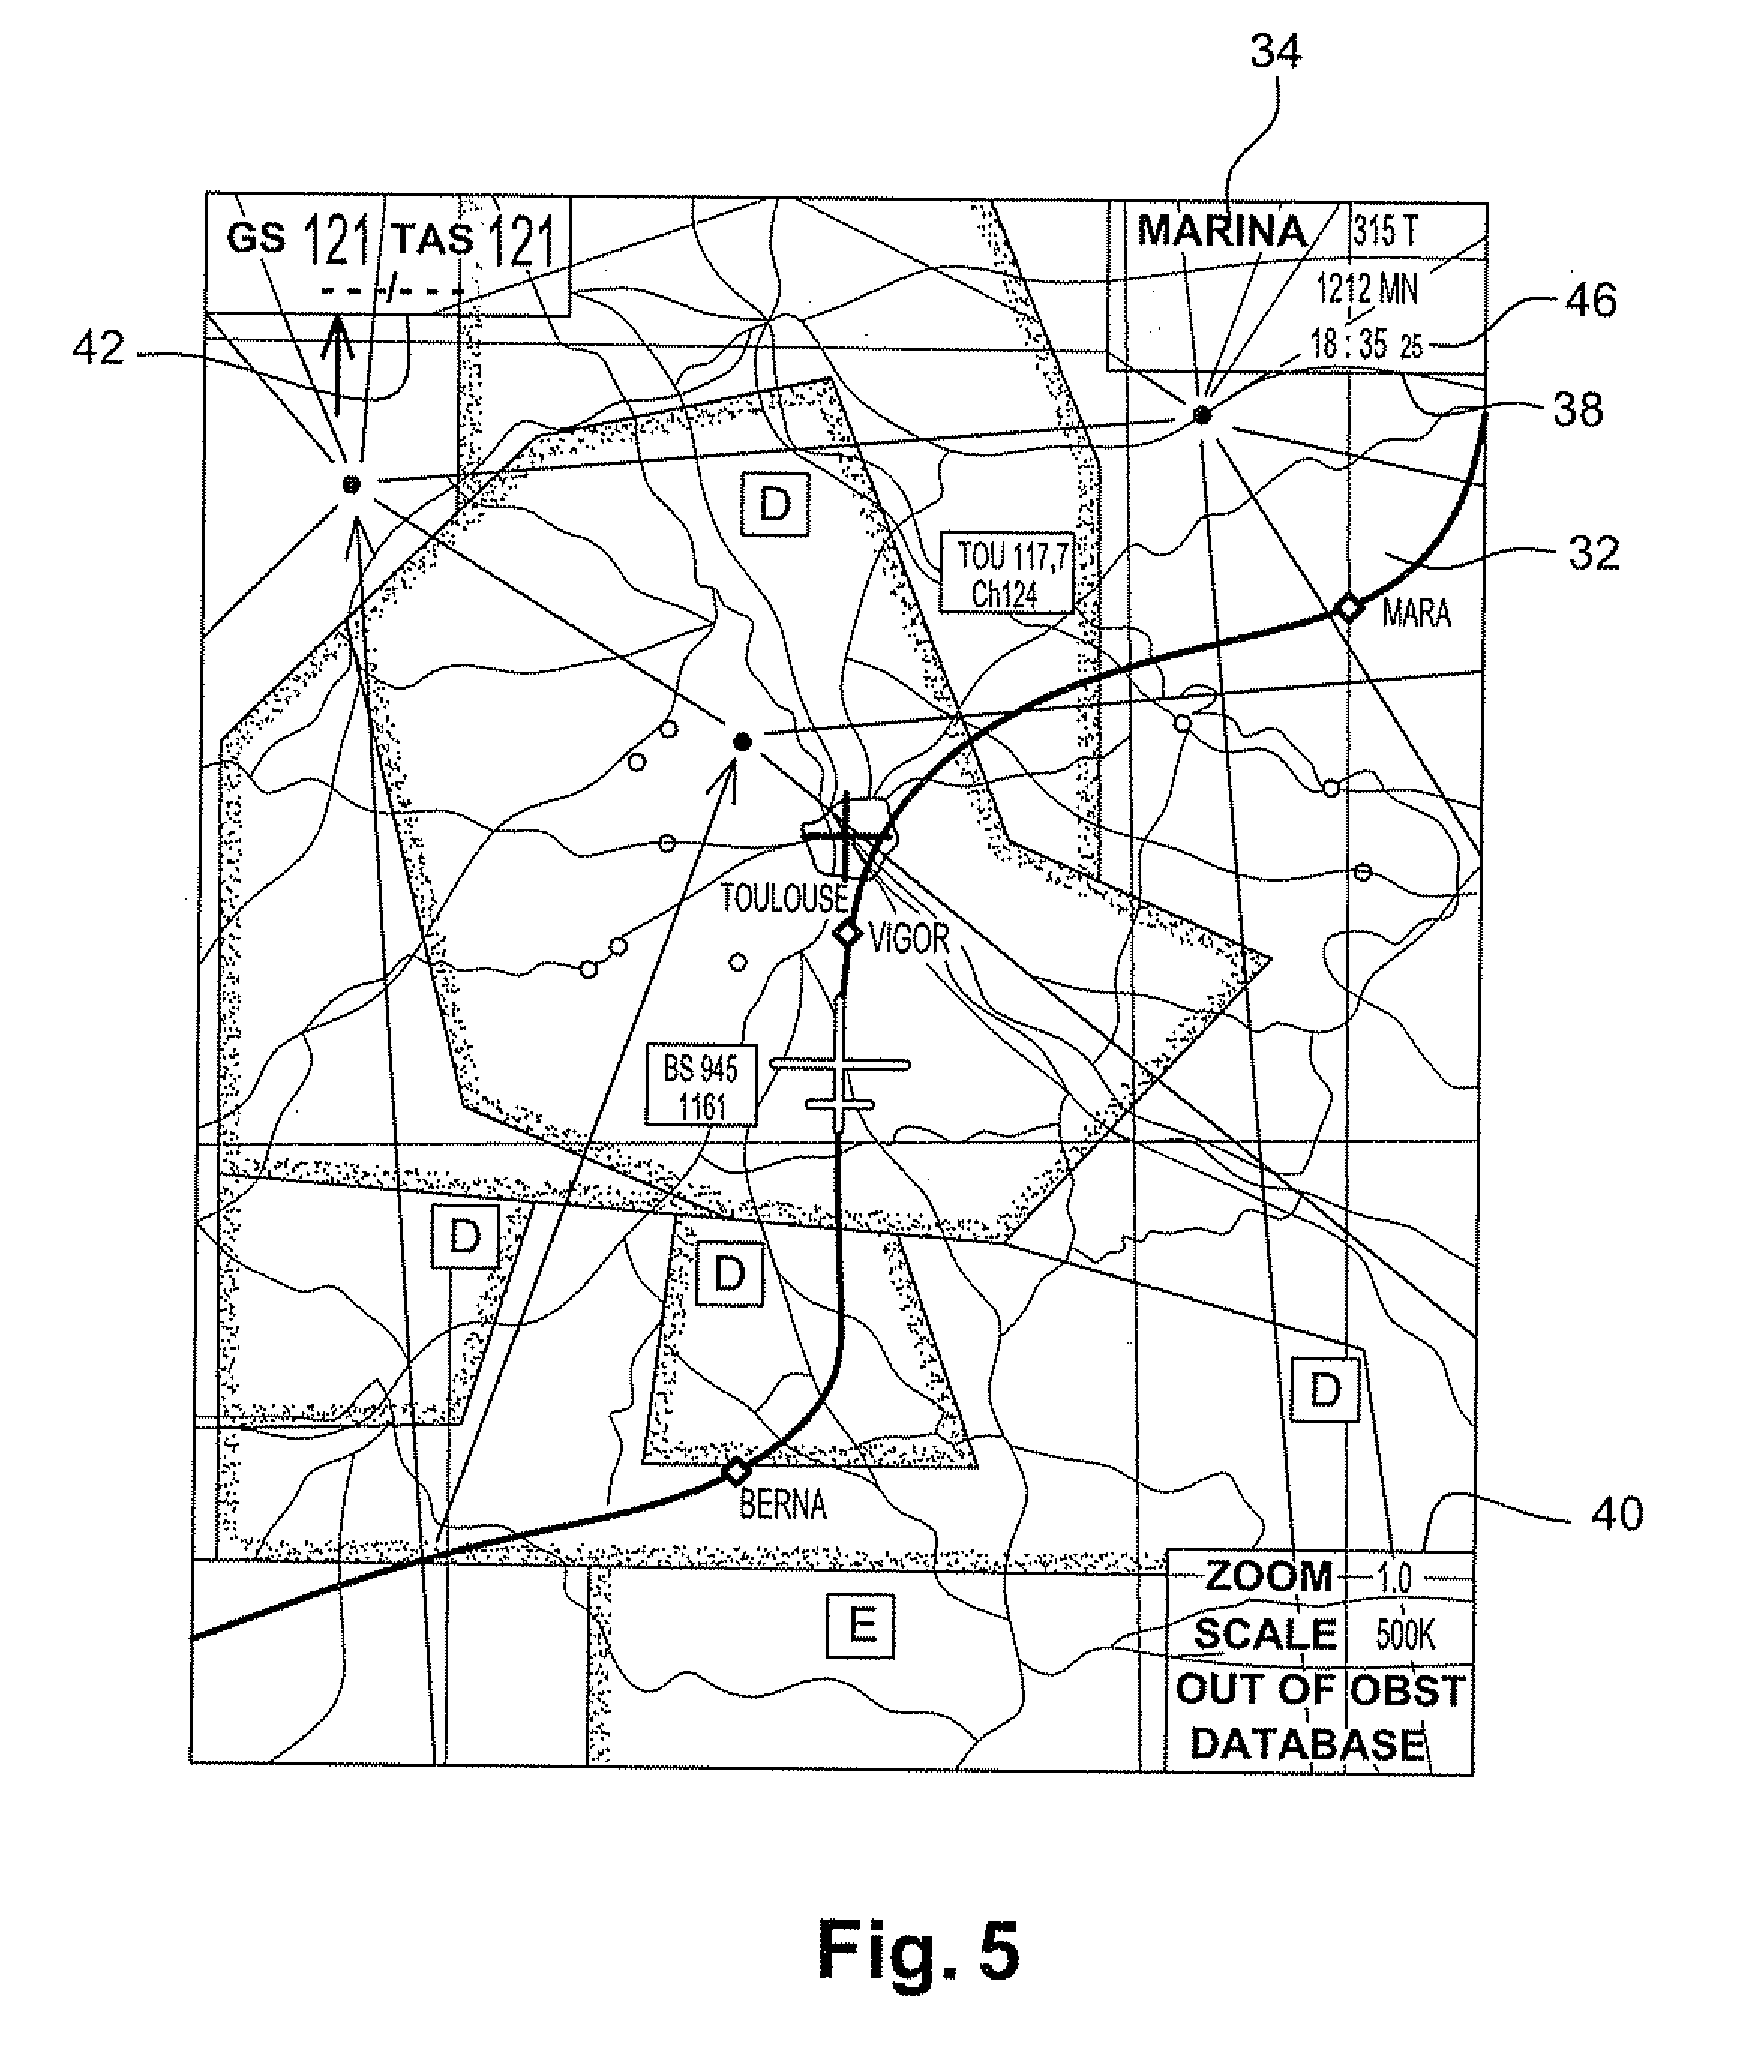 Method of displaying an image on a screen of an aircraft